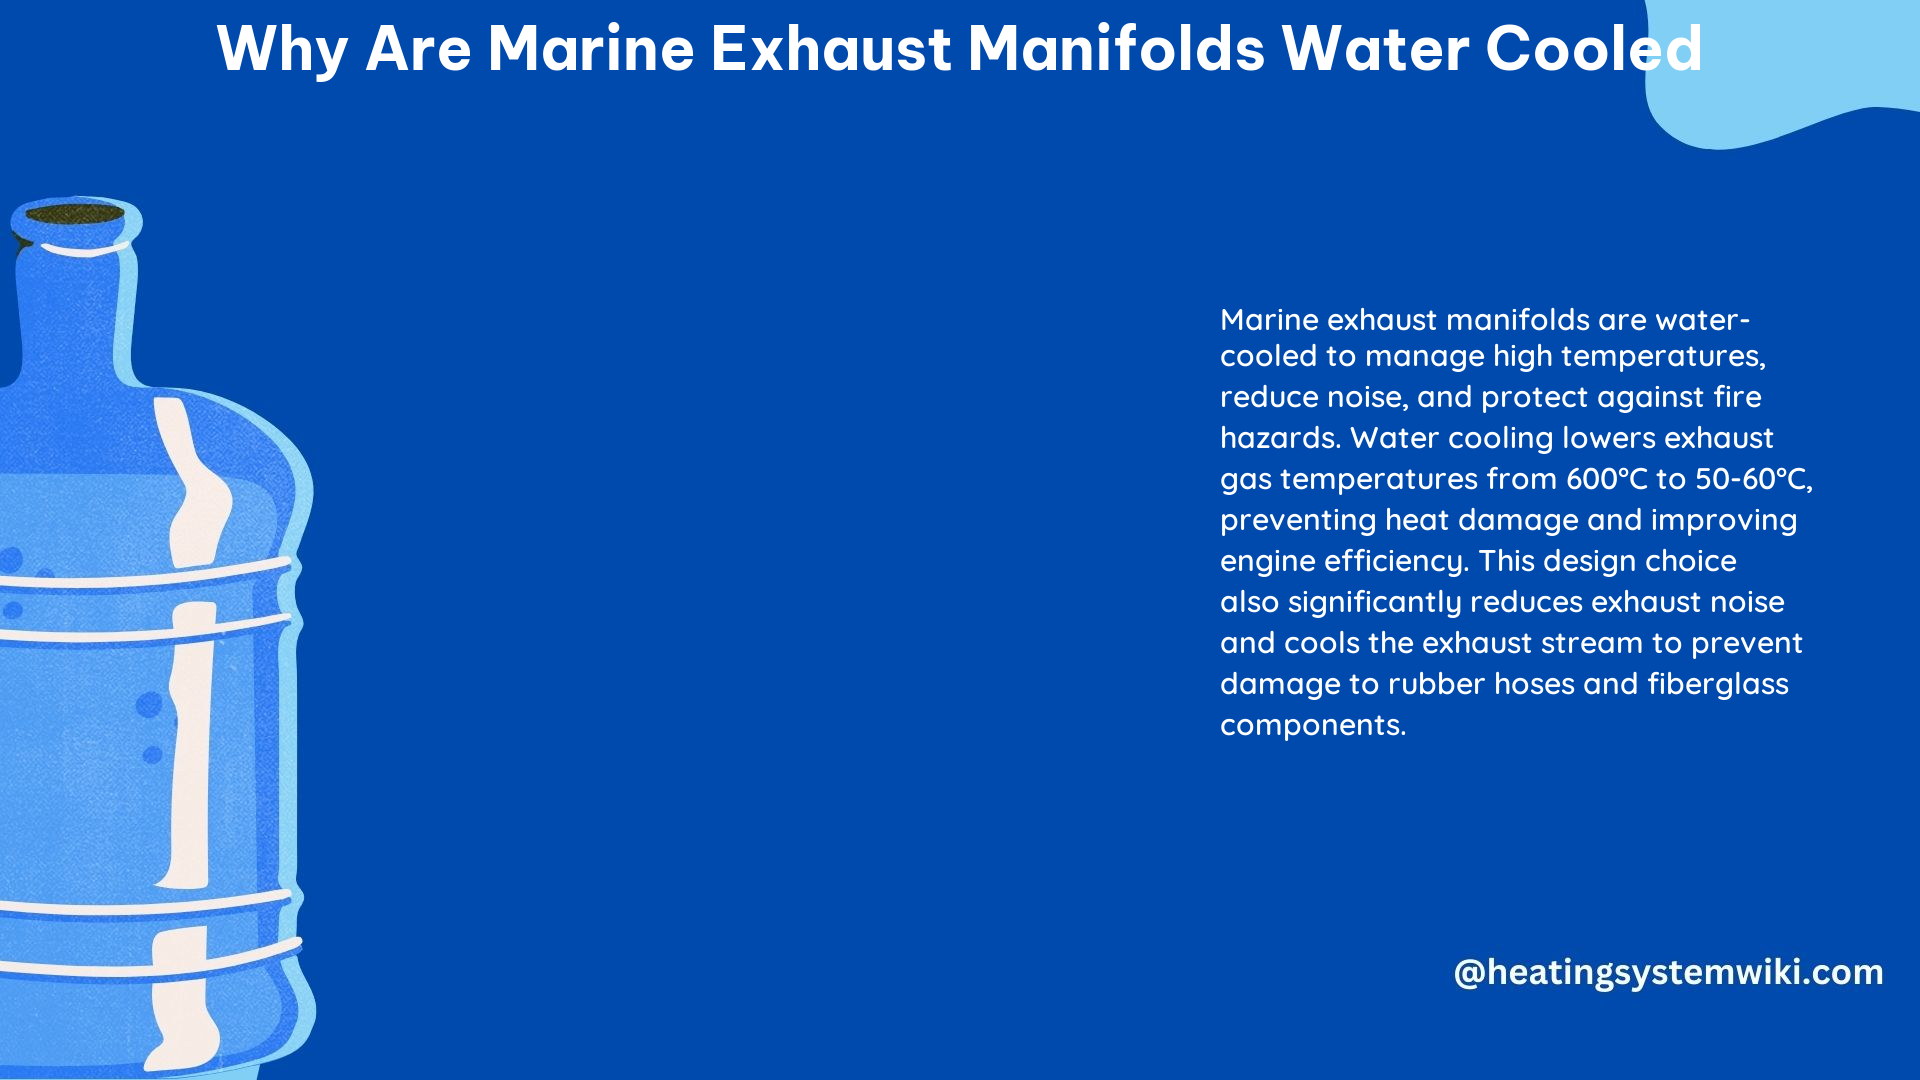 Why Are Marine Exhaust Manifolds Water Cooled